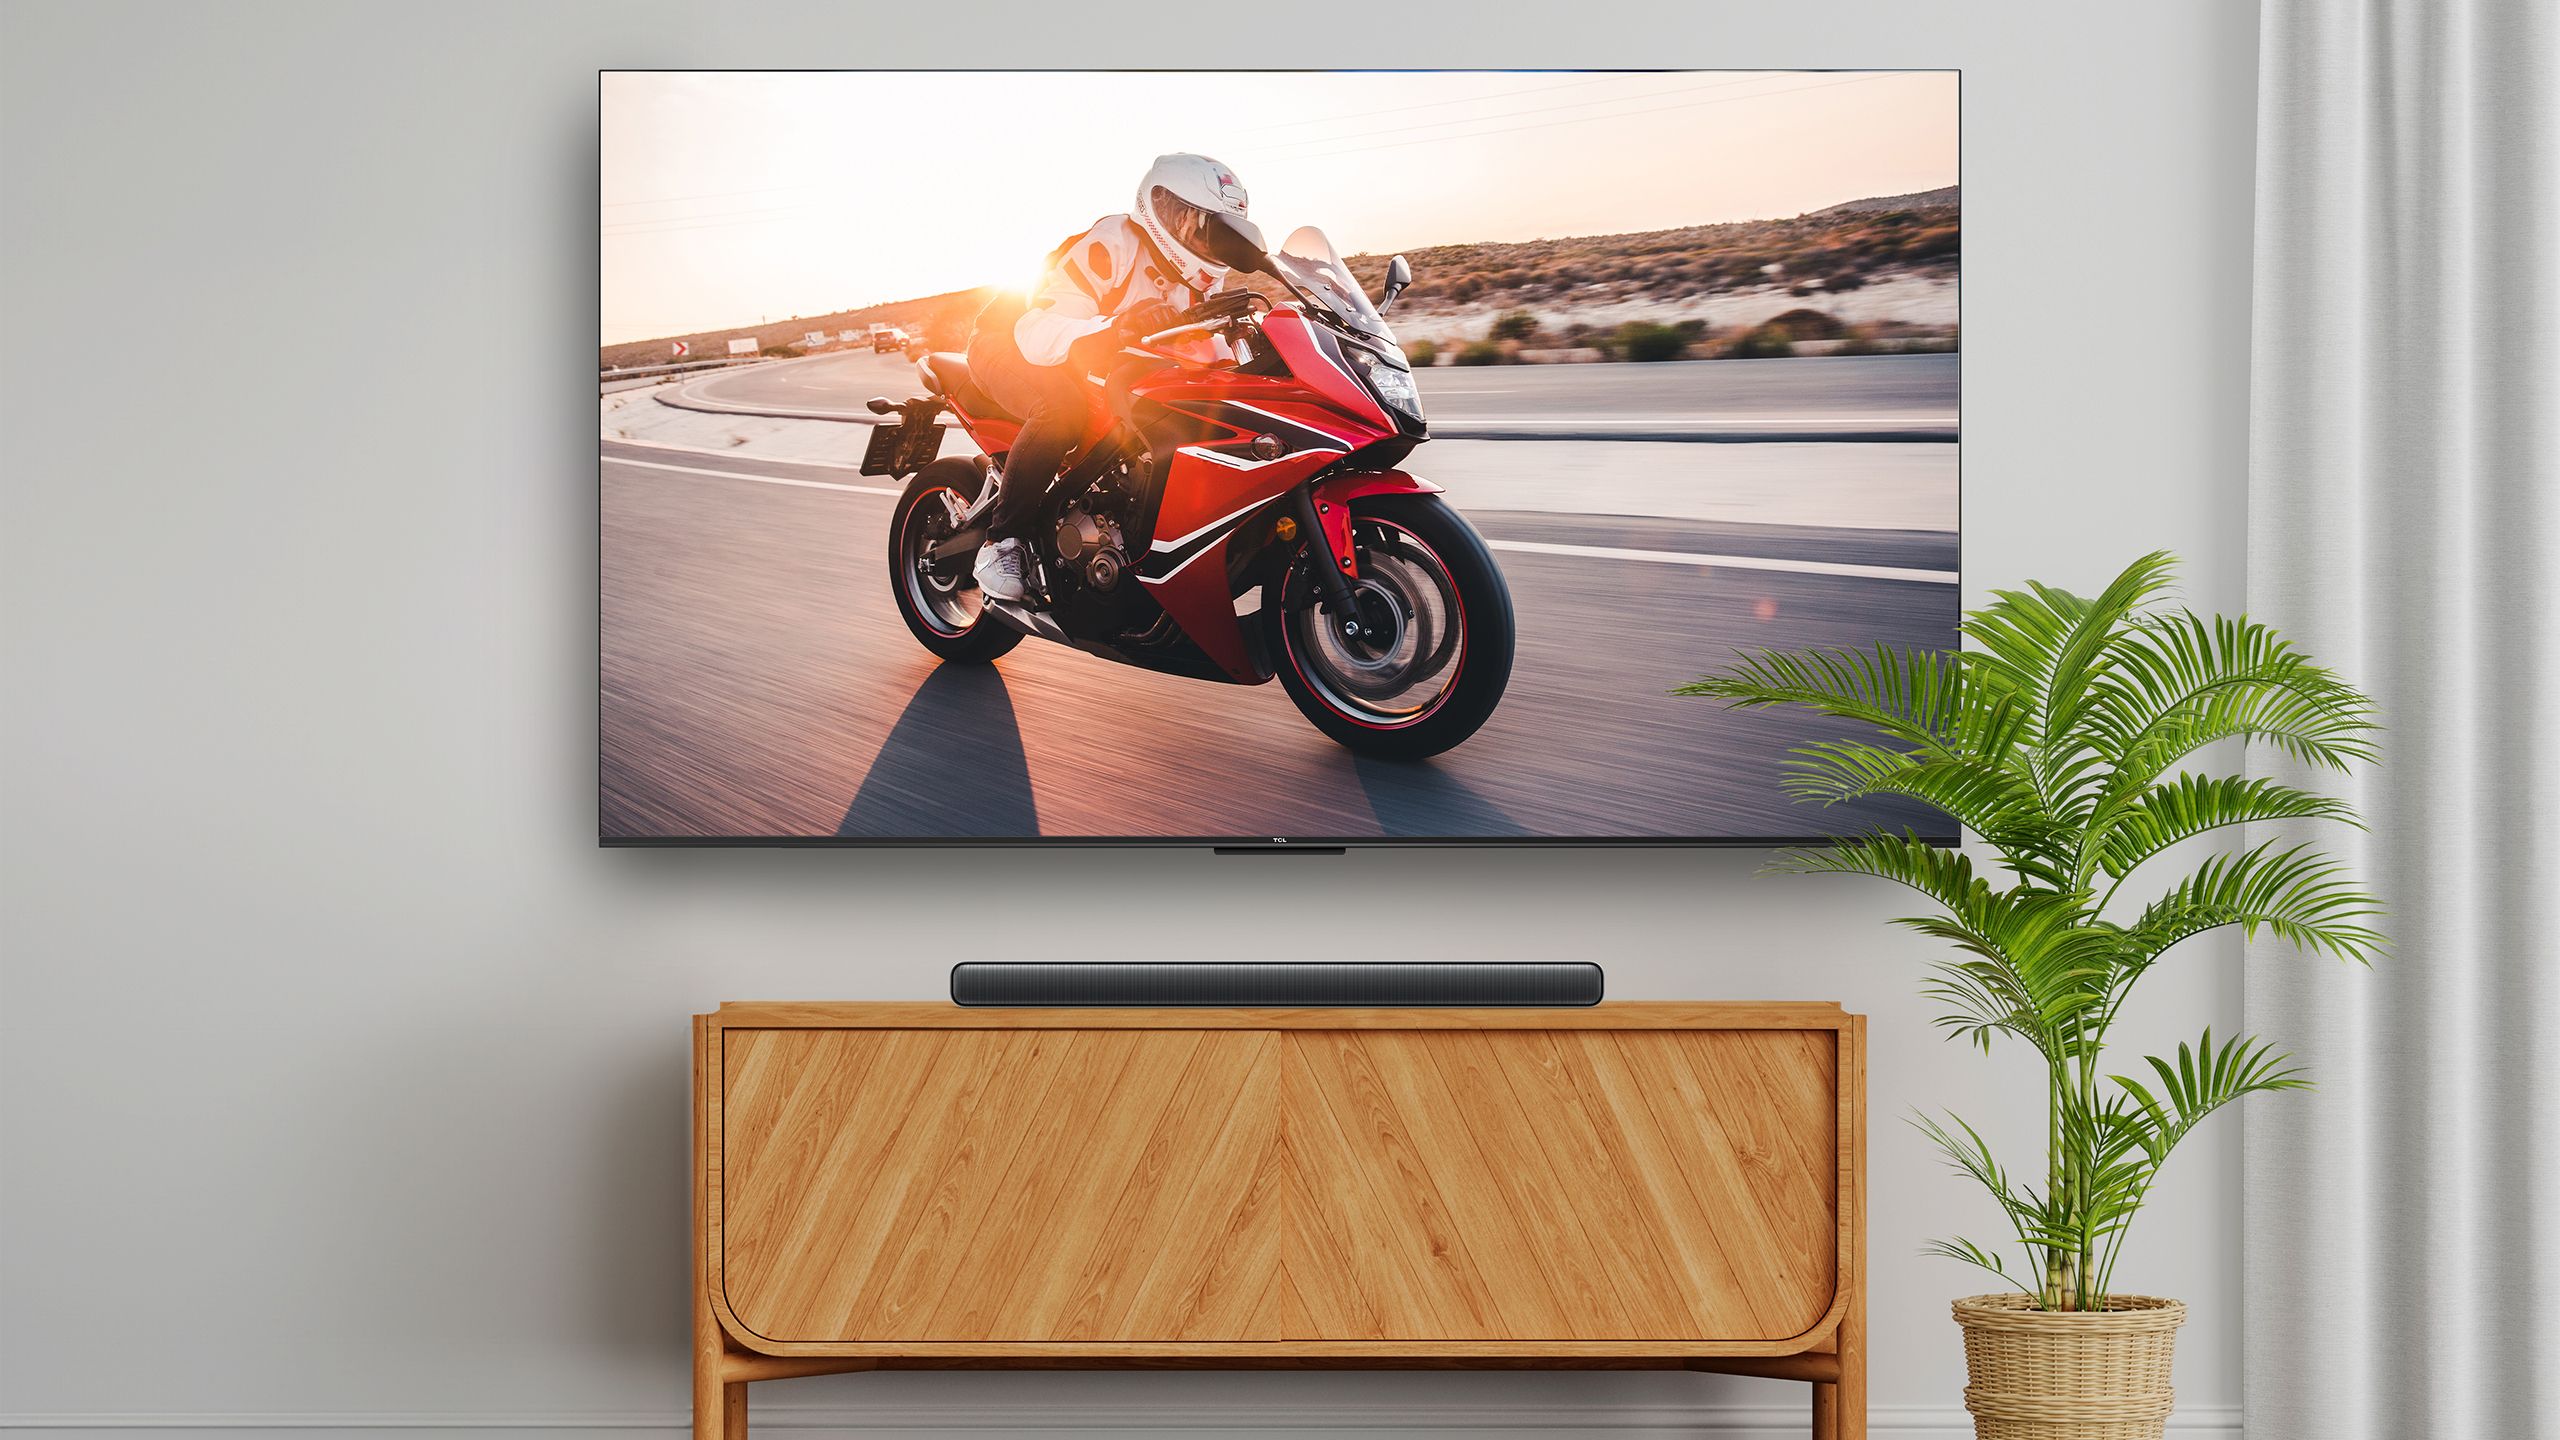 The TCL S45H soundbar on a table below a TV with a motorcycle video on the screen. 